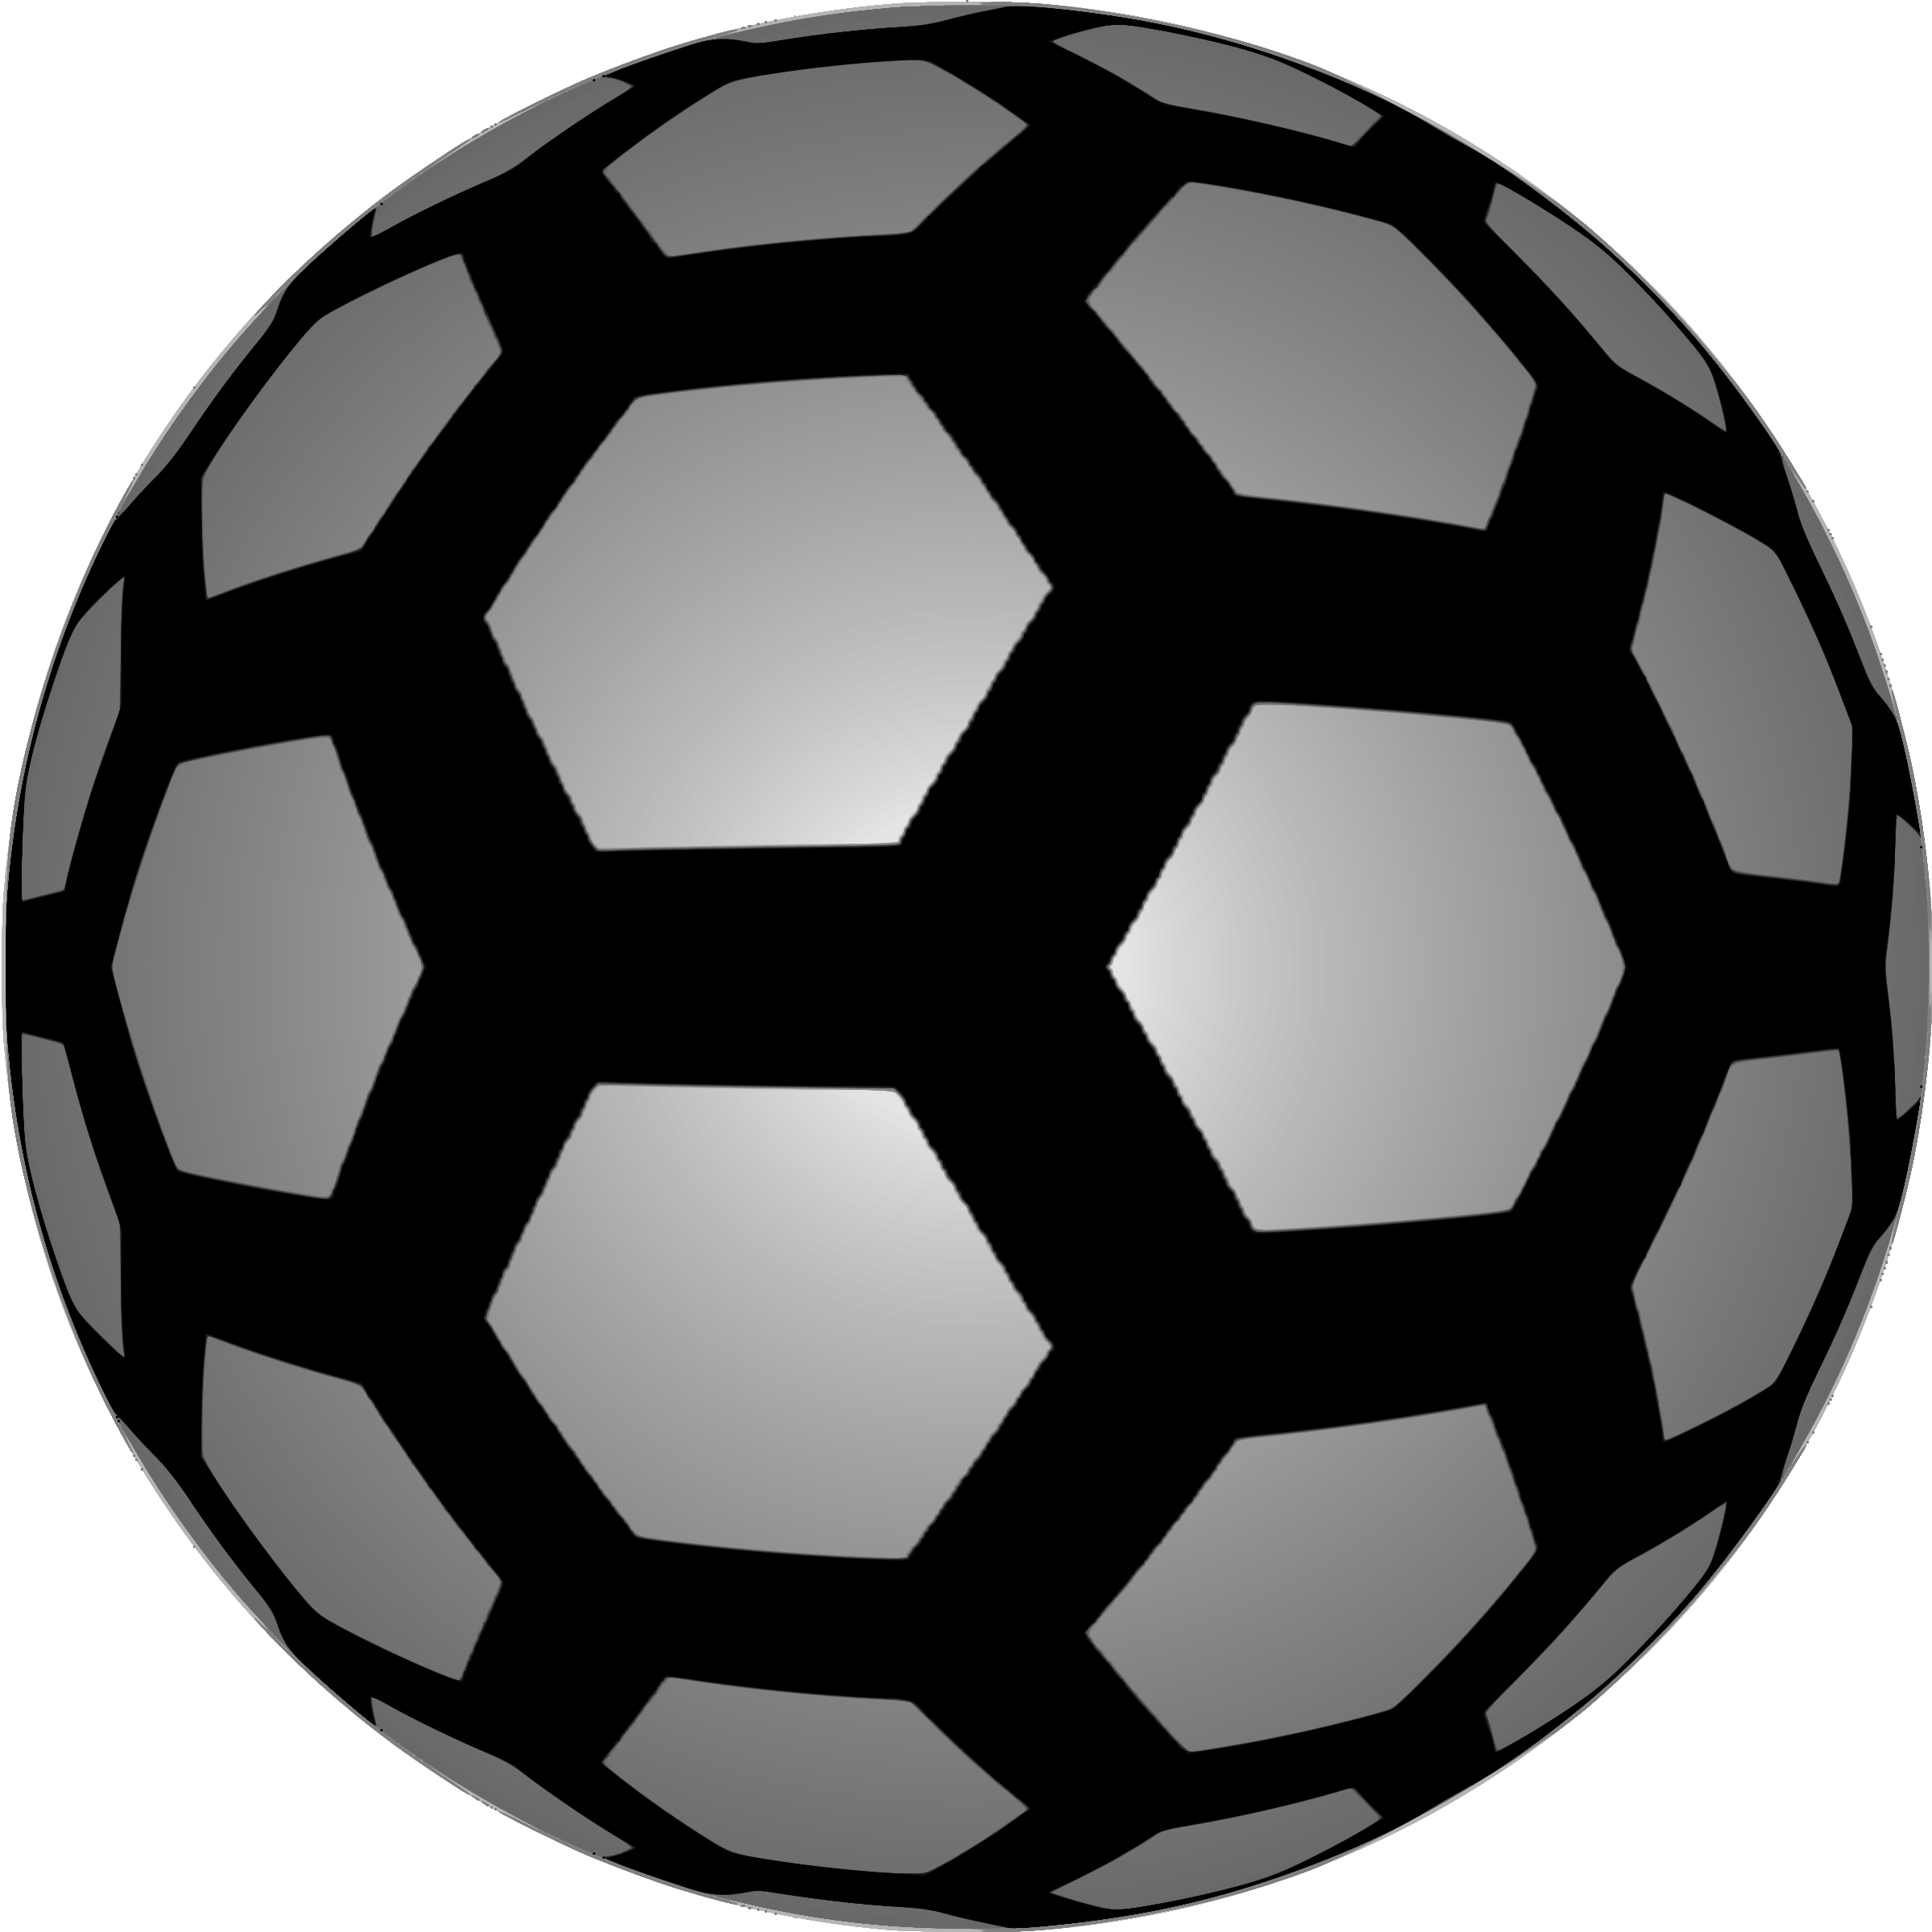 A Black And White Ball With Hexagons